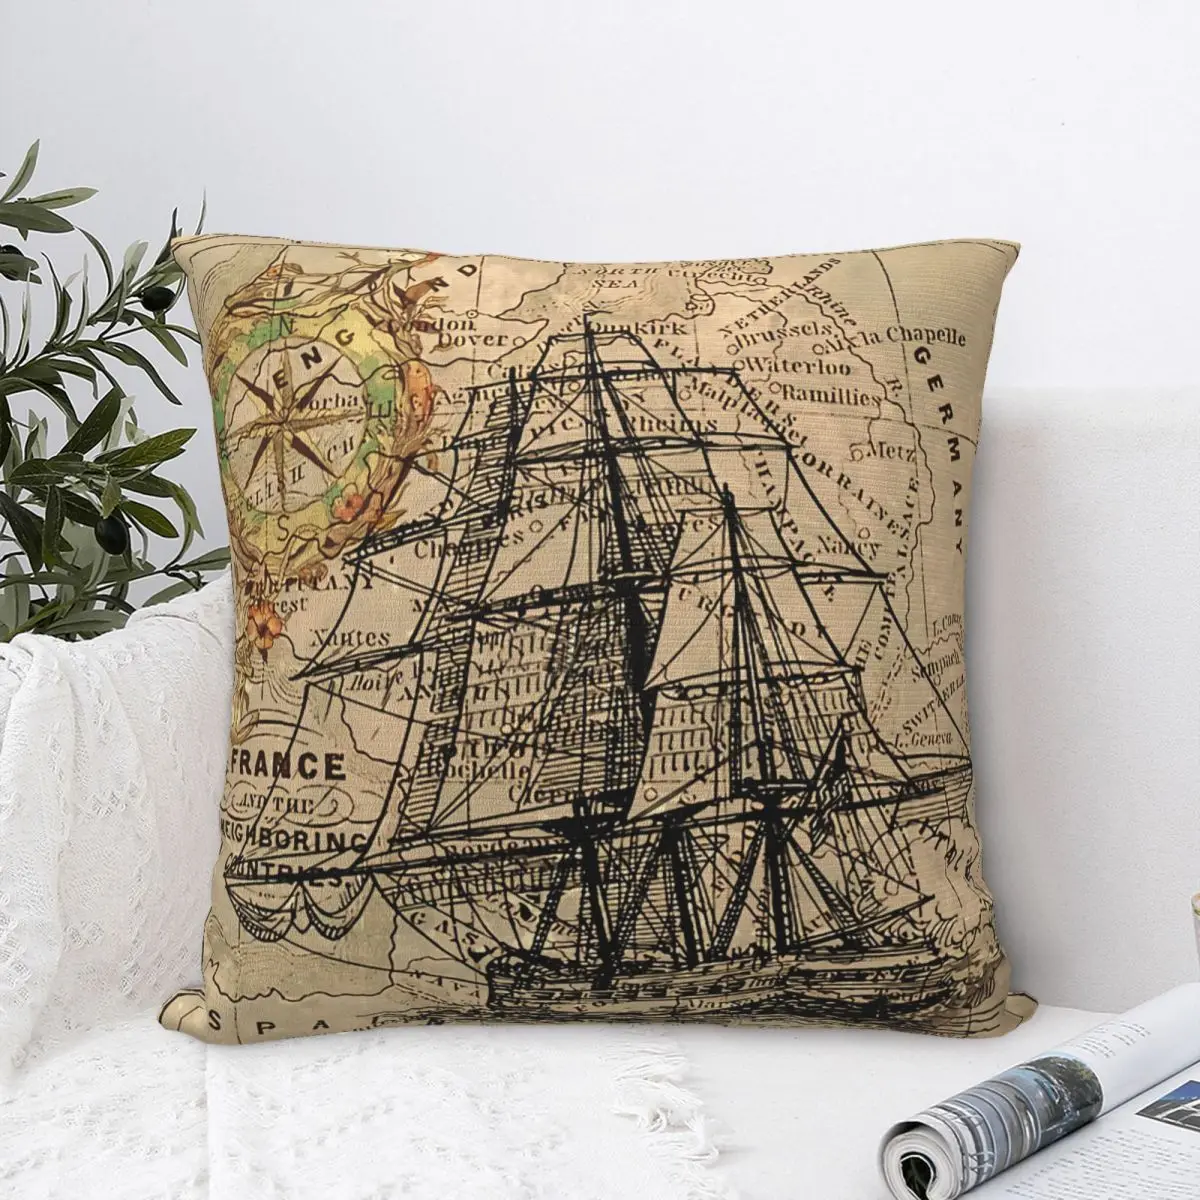 

Vintage Pirate Ship Sailor Antique World Map Pillowcase Backpack Cushion For Bedroom Printed Throw Pillow Case Decorative